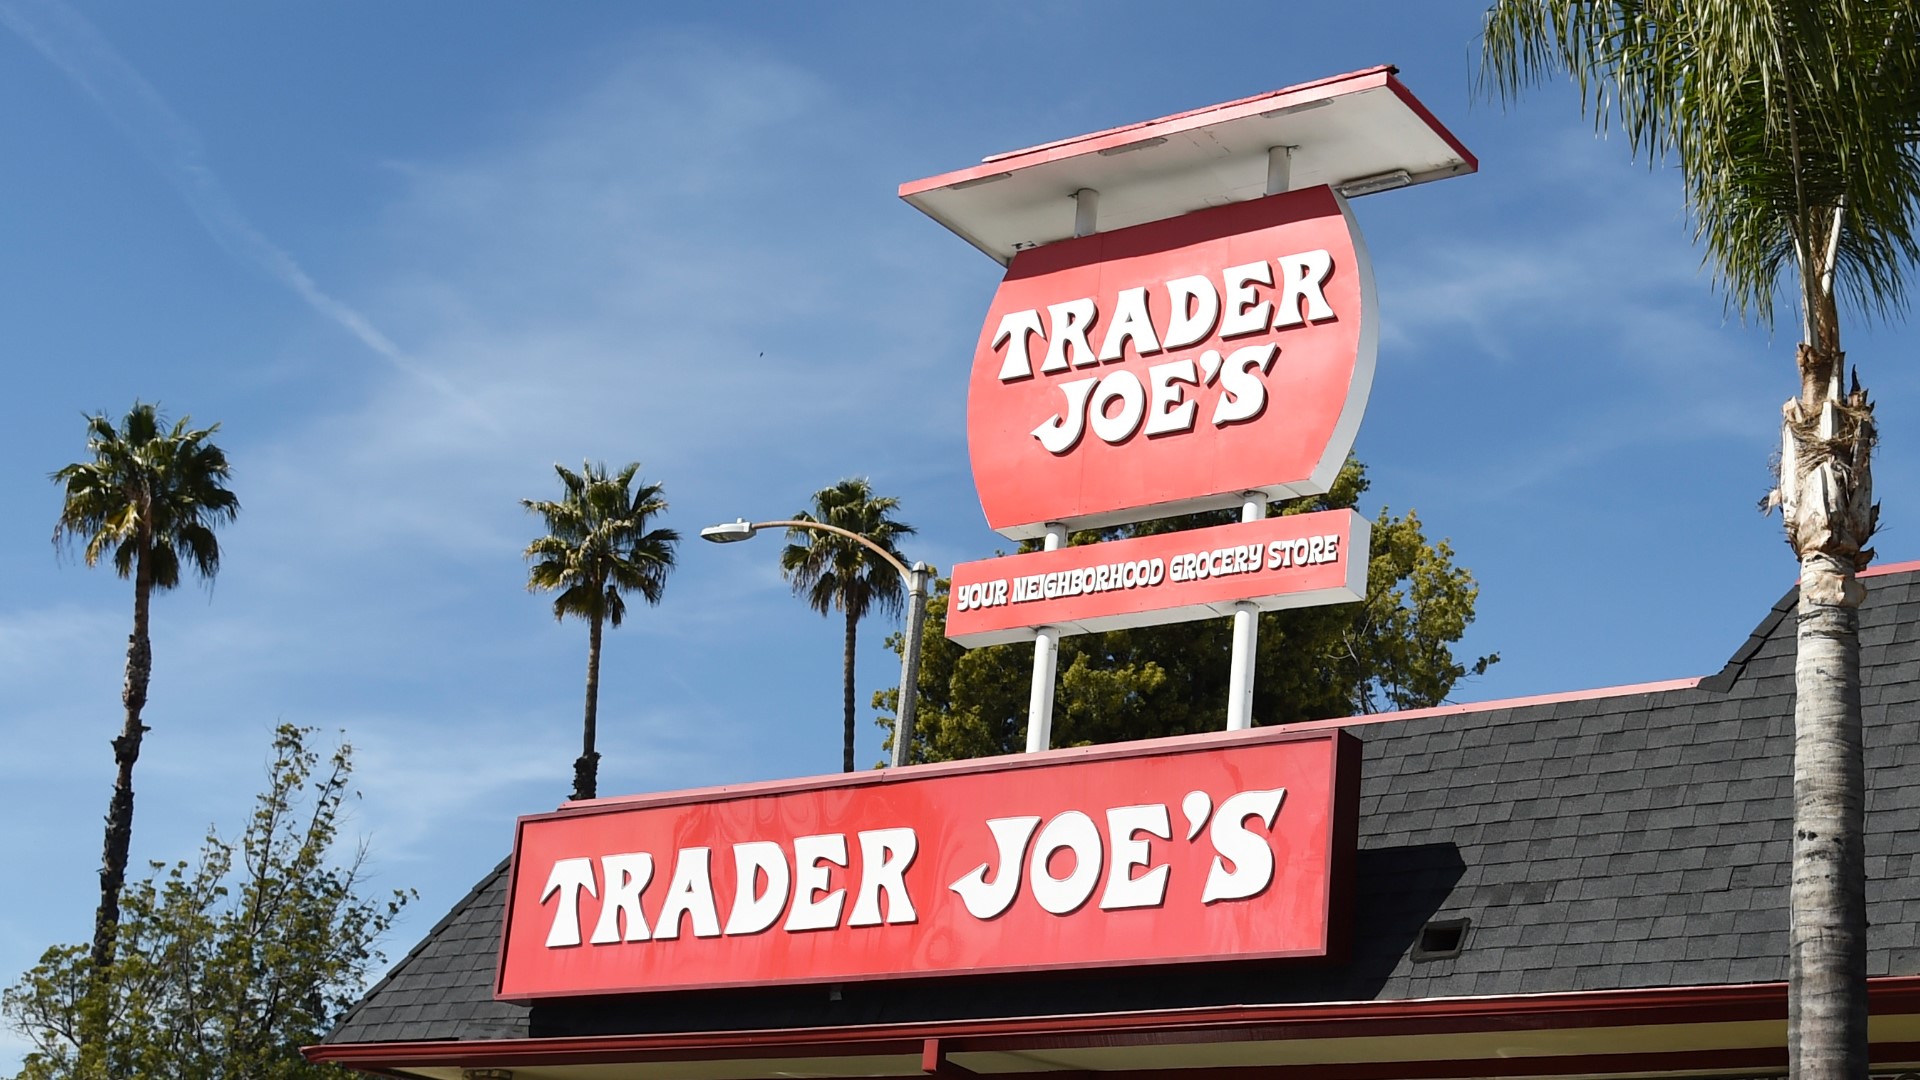 It would be the second Trader Joe's in Pinellas County and the third in the immediate Tampa Bay area.